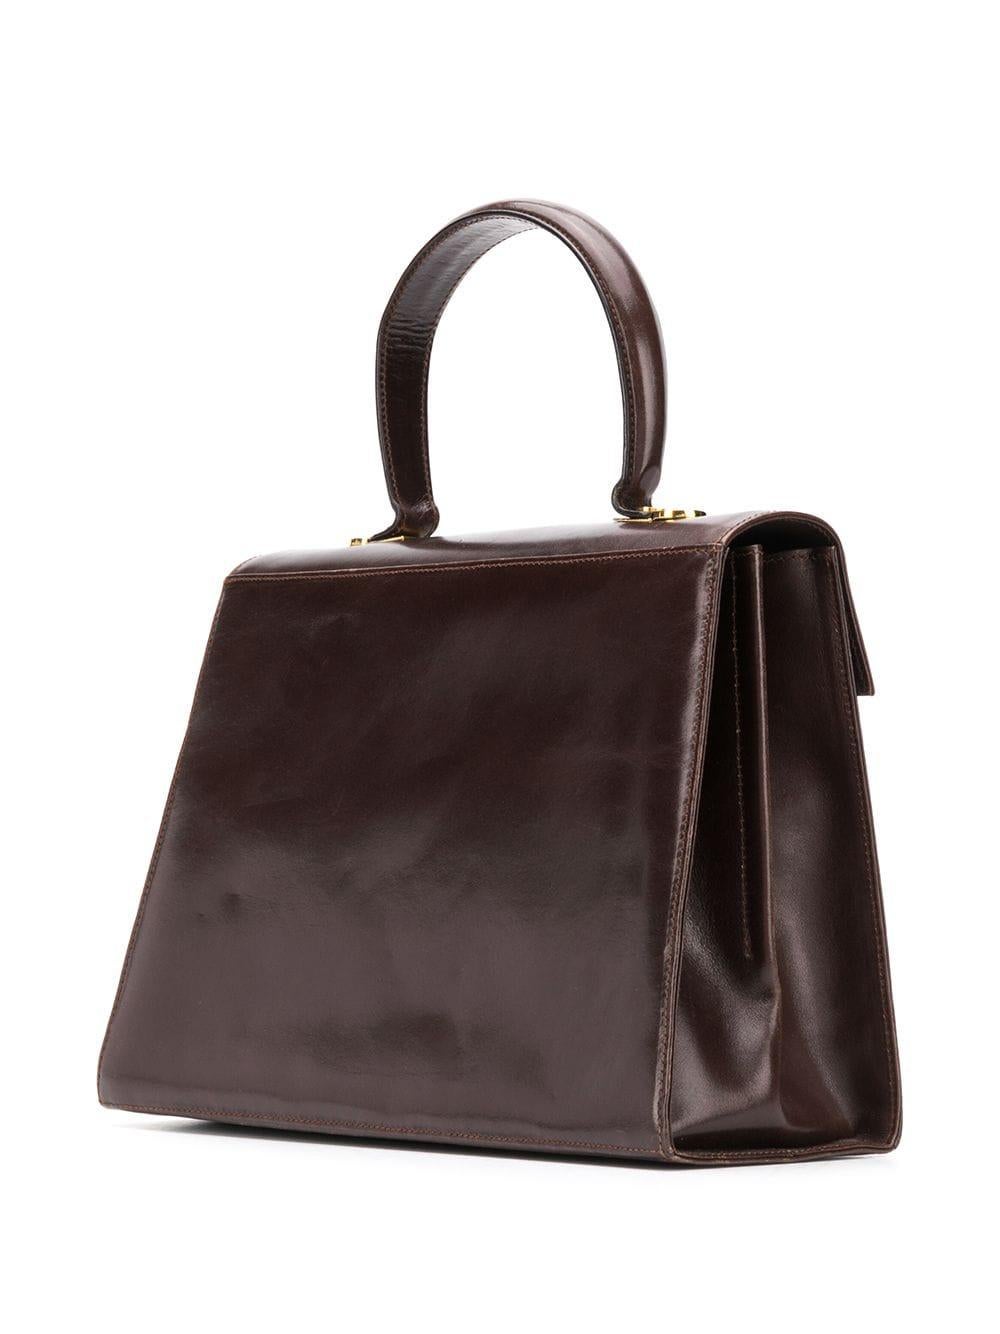 Salvatore Ferragamo brown leather Gancini shoulder bag featuring gold-tone hardware, an internal logo patch, a foldover top, a chain shoulder strap, an internal zipped pocket, a leather lining and a signature Gancini fastening. 
In excellent vintage